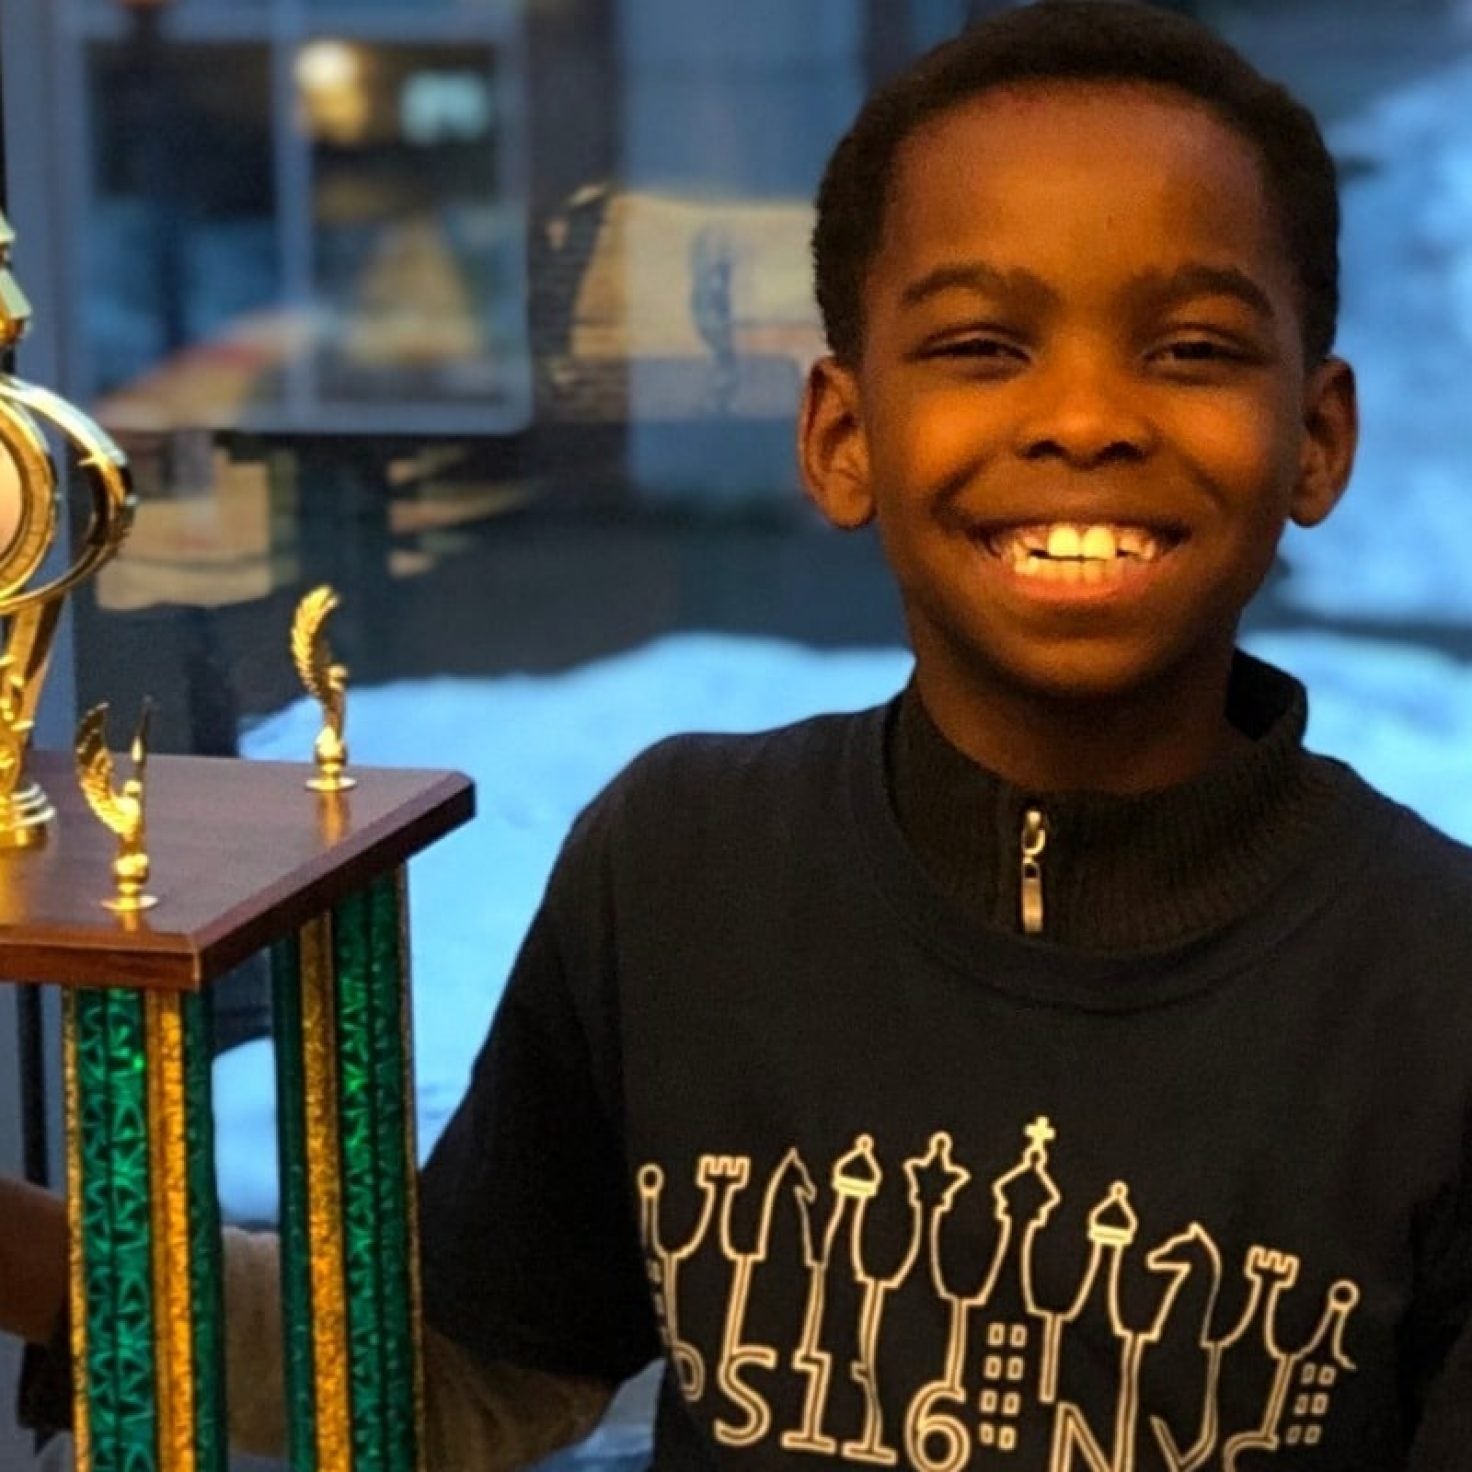 Trevor Noah Is Producing A Movie About The Homeless 8-Year Old Nigerian Chess Prodigy Who Won NY State Championship